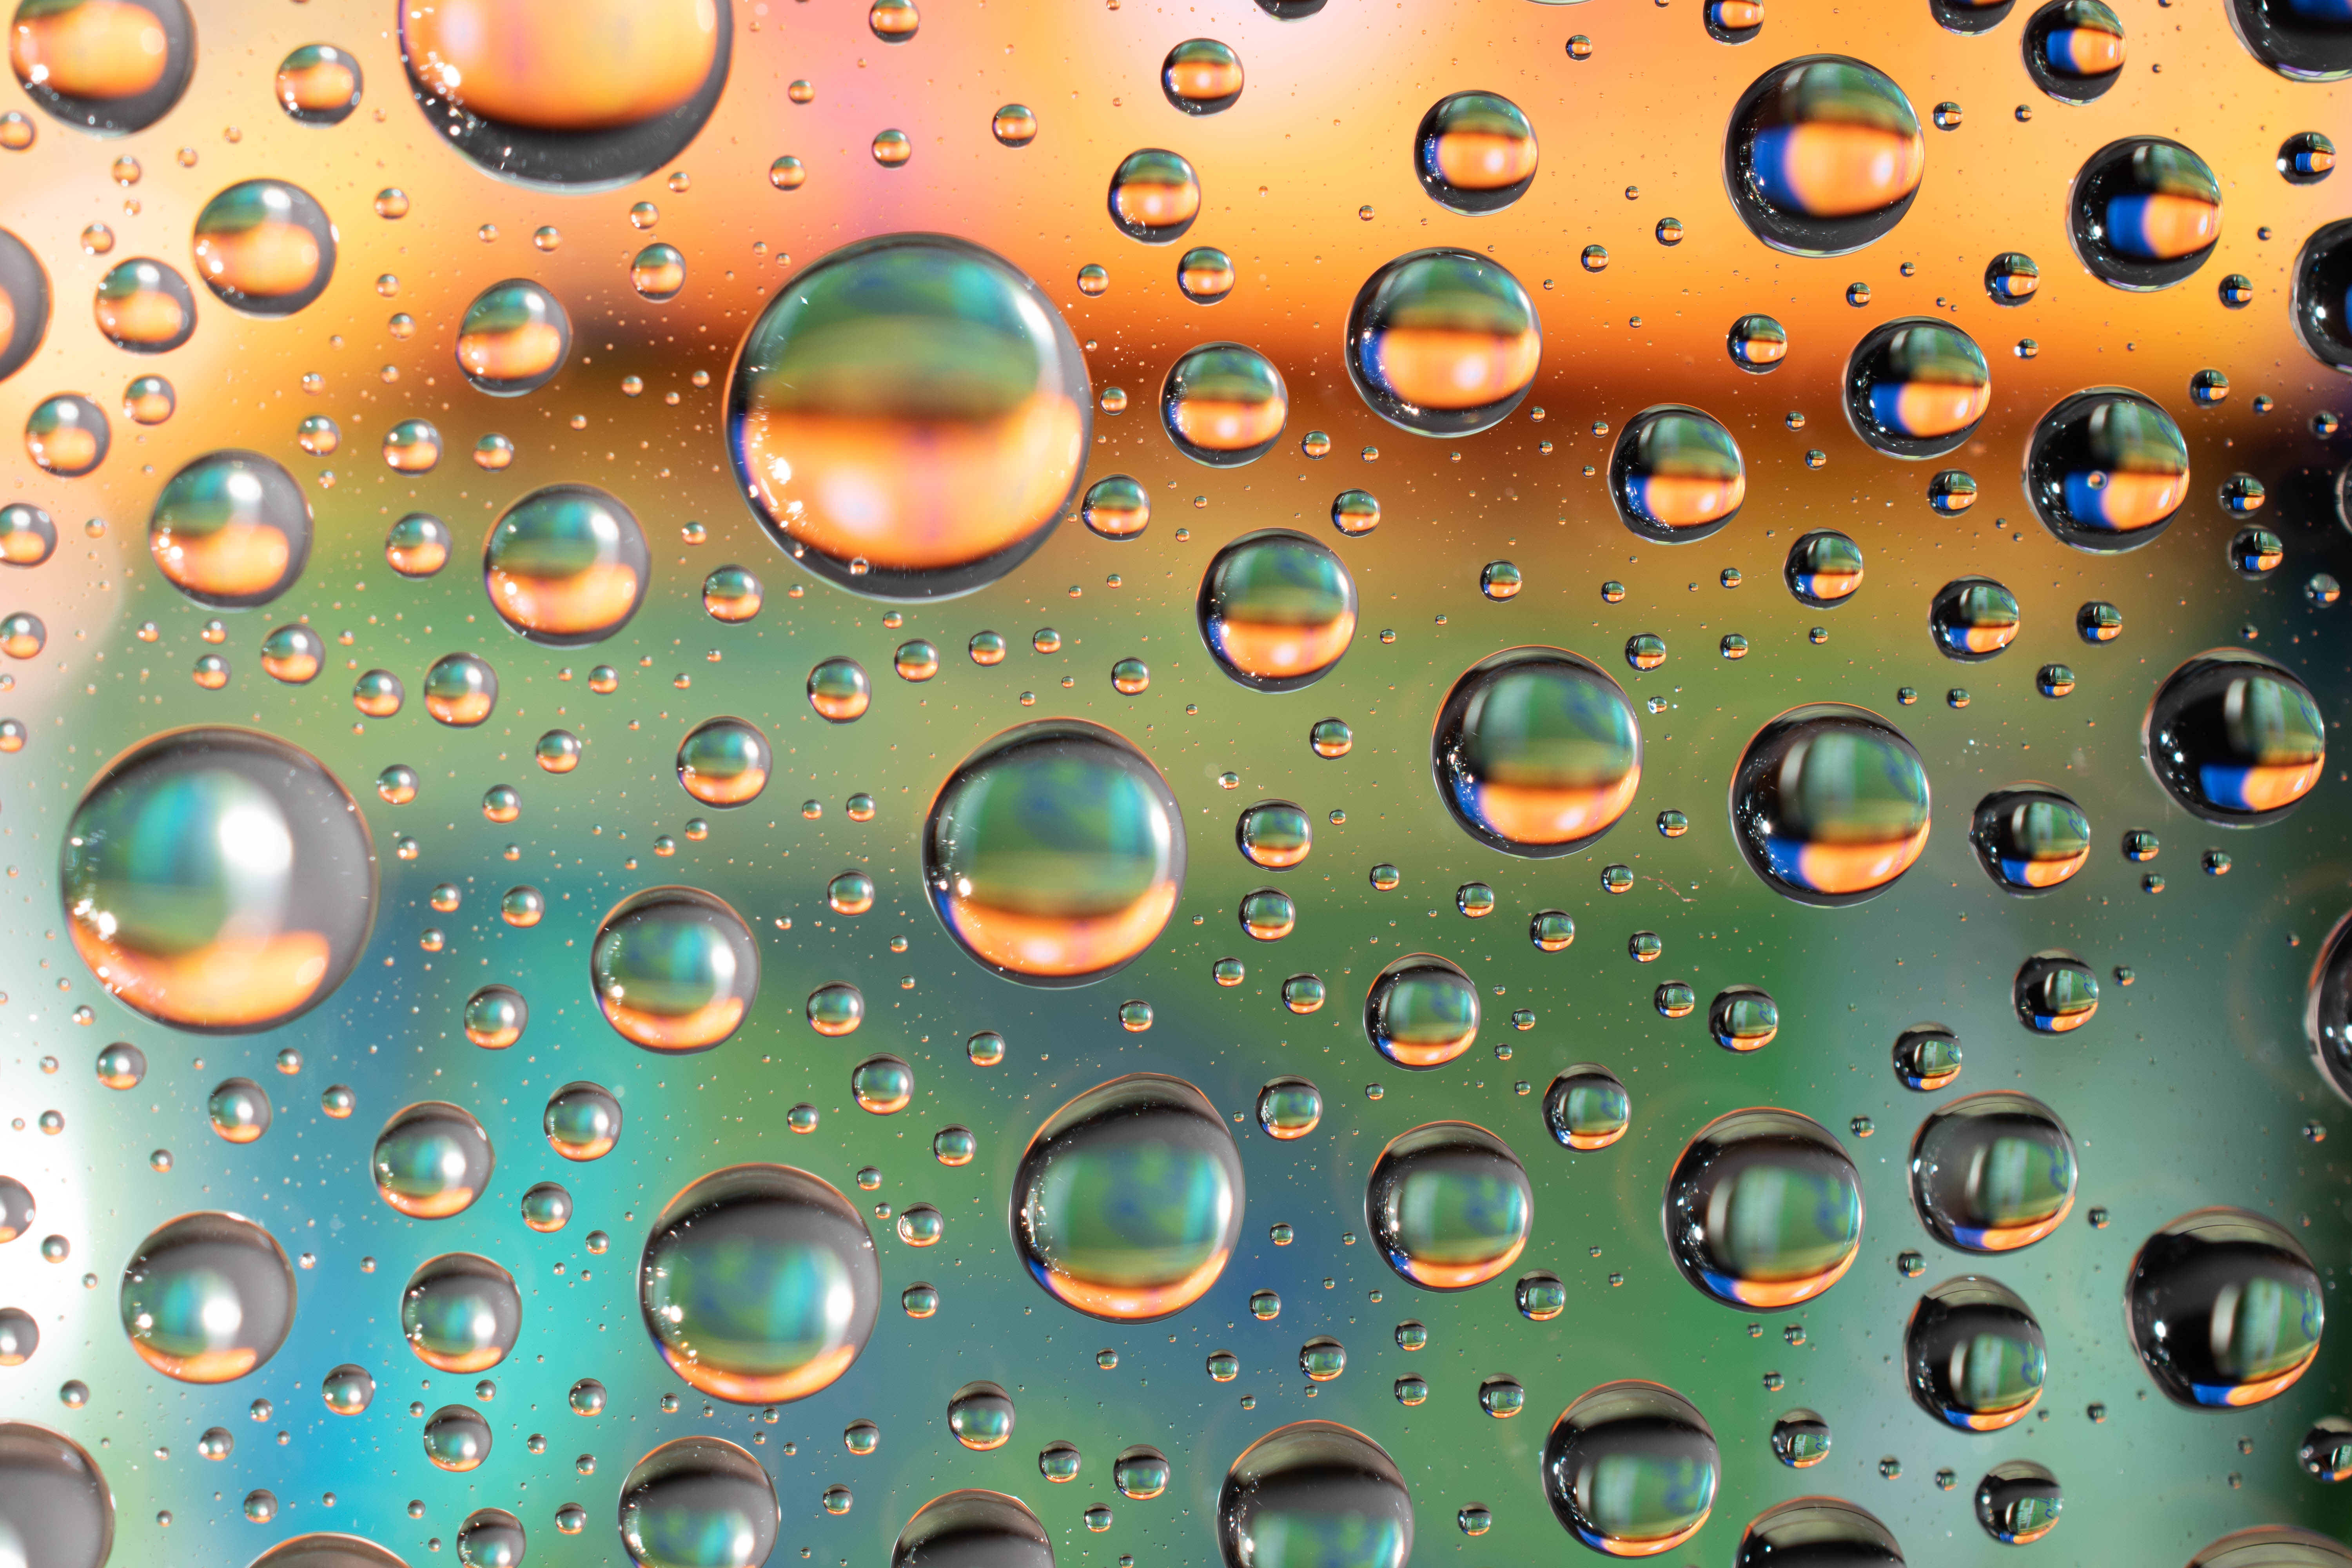 101128 download wallpaper liquid, bubbles, macro, gases screensavers and pictures for free